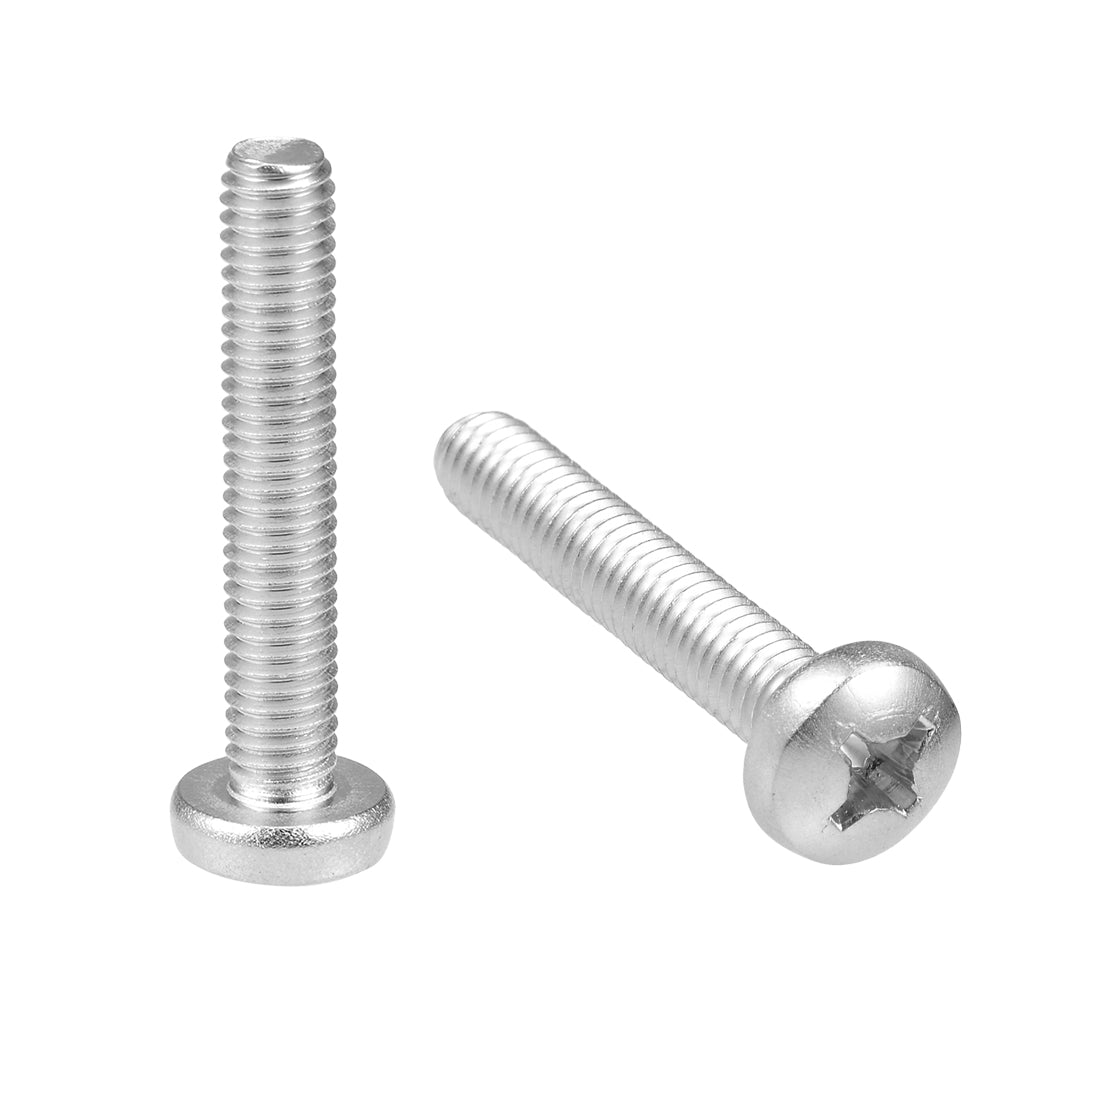 Uxcell Uxcell M6x35mm Machine Screws Pan Phillips Cross Head Screw 304 Stainless Steel Fasteners Bolts 15Pcs